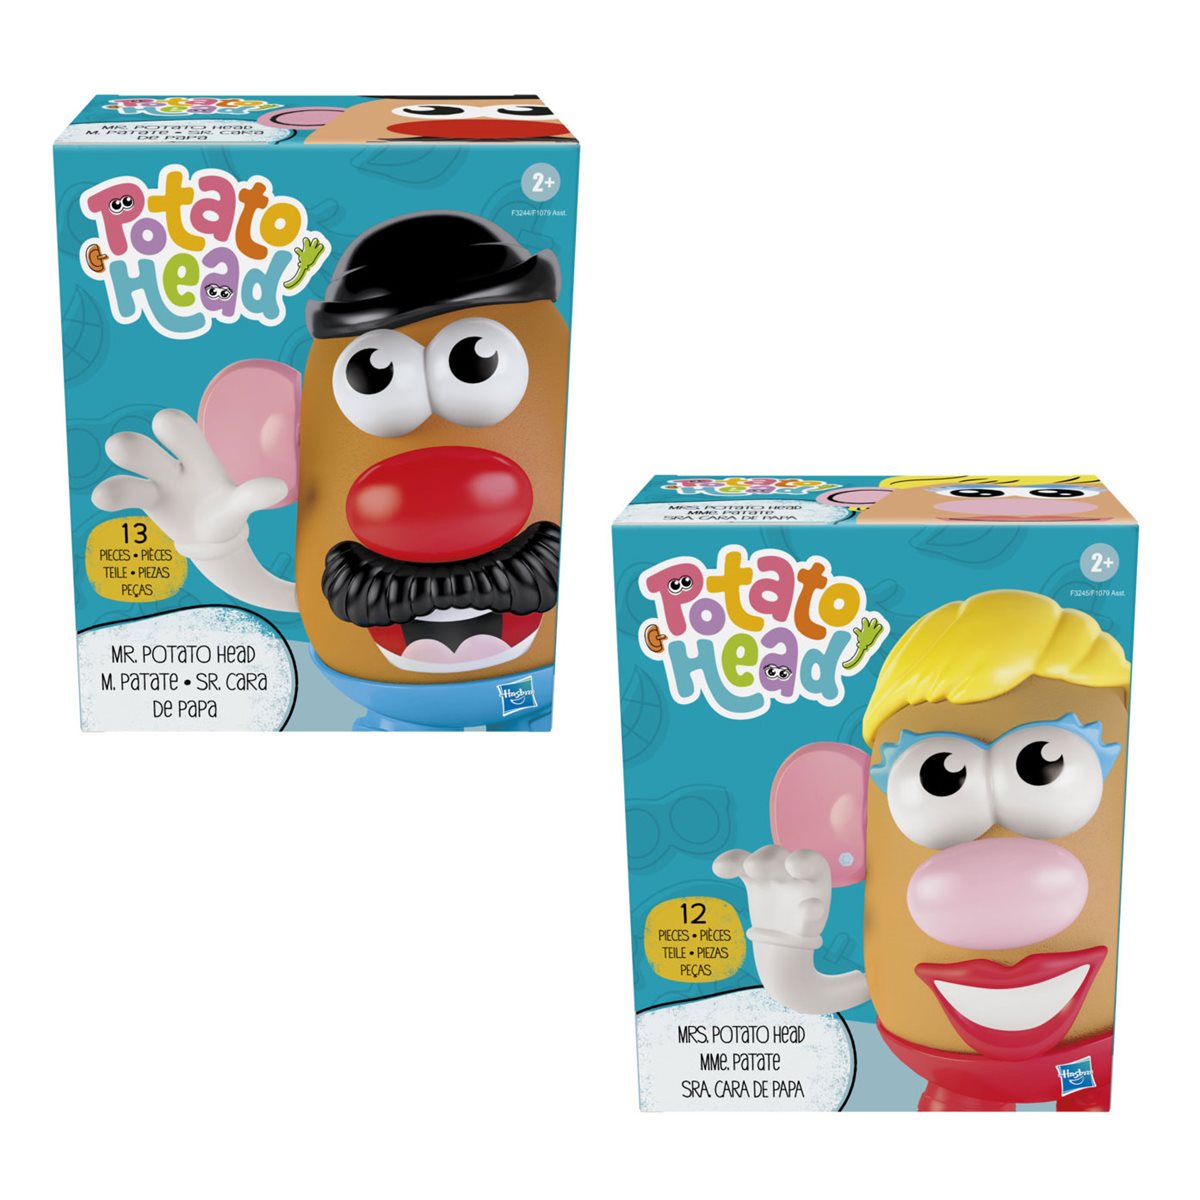 How I Packed My Mr. Potato Head Fill A Box in Disney Springs 